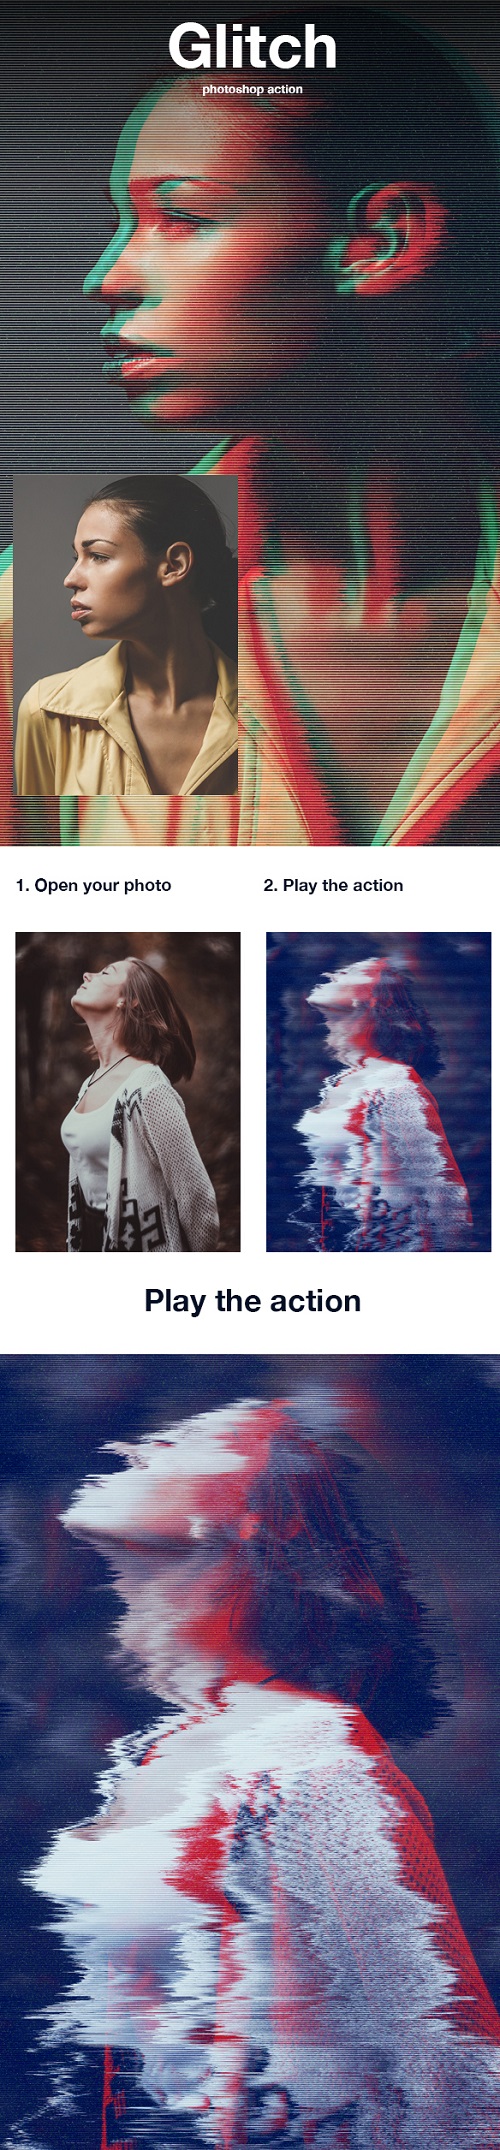 Glitch Photoshop Action | Photo Effects - 20806451